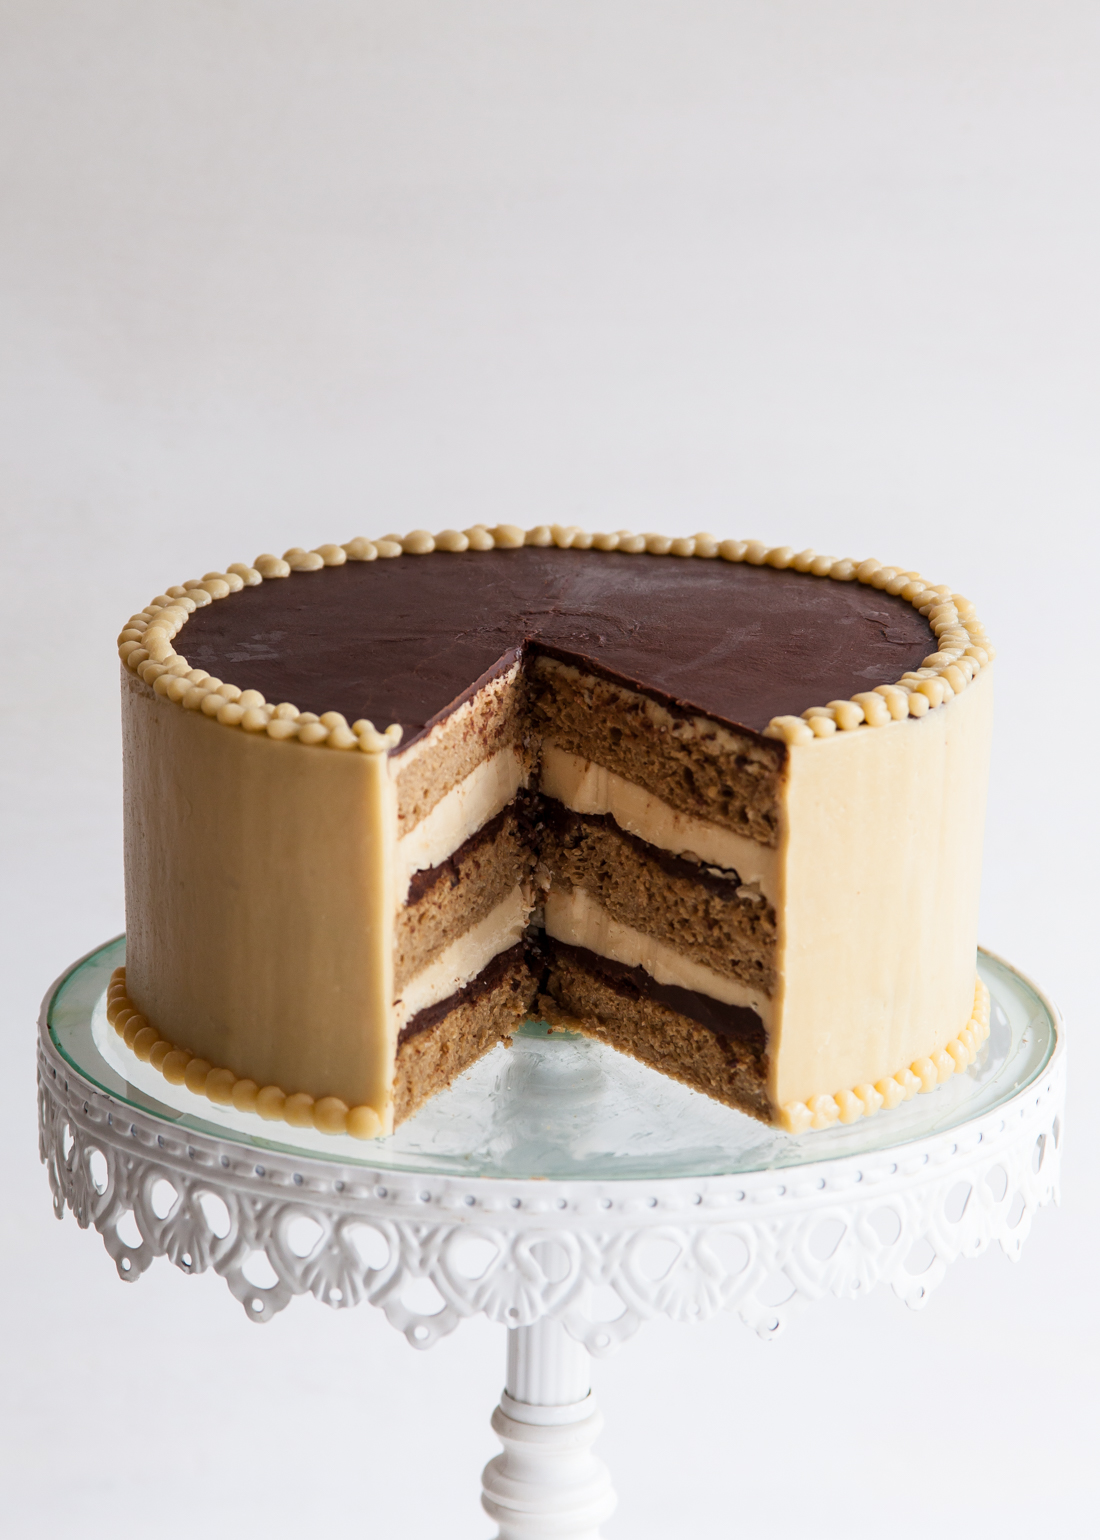 Outtake from "Layered" of the French Opera Cake.